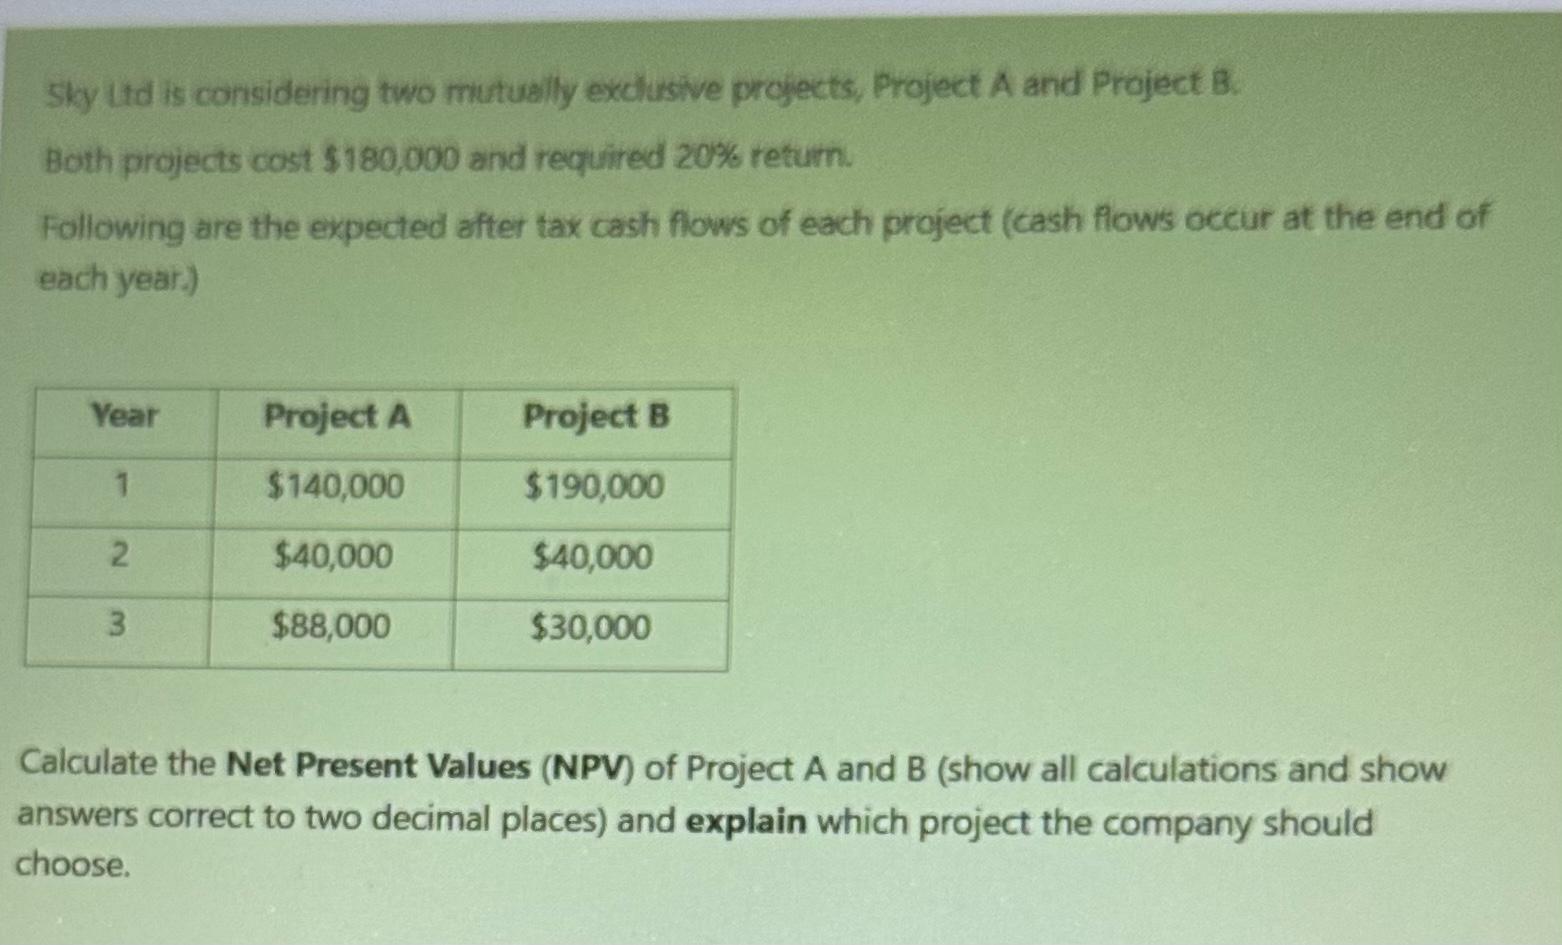 Sky Lid is considering two mutually exclusive projects, Project A and Project B.  Both projects cost $180,000 and required 20% return.  Following are the expected after tax cash flows of each project (cash flows occur at the end of  each year.)  Year  Project A  Project B  $140,000  $190,000  2  $40,000  $40,000  W  $88,000  $30,000  Calculate the Net Present Values (NPV) of Project A and B (show all calculations and show  answers correct to two decimal places) and explain which project the company should  choose.